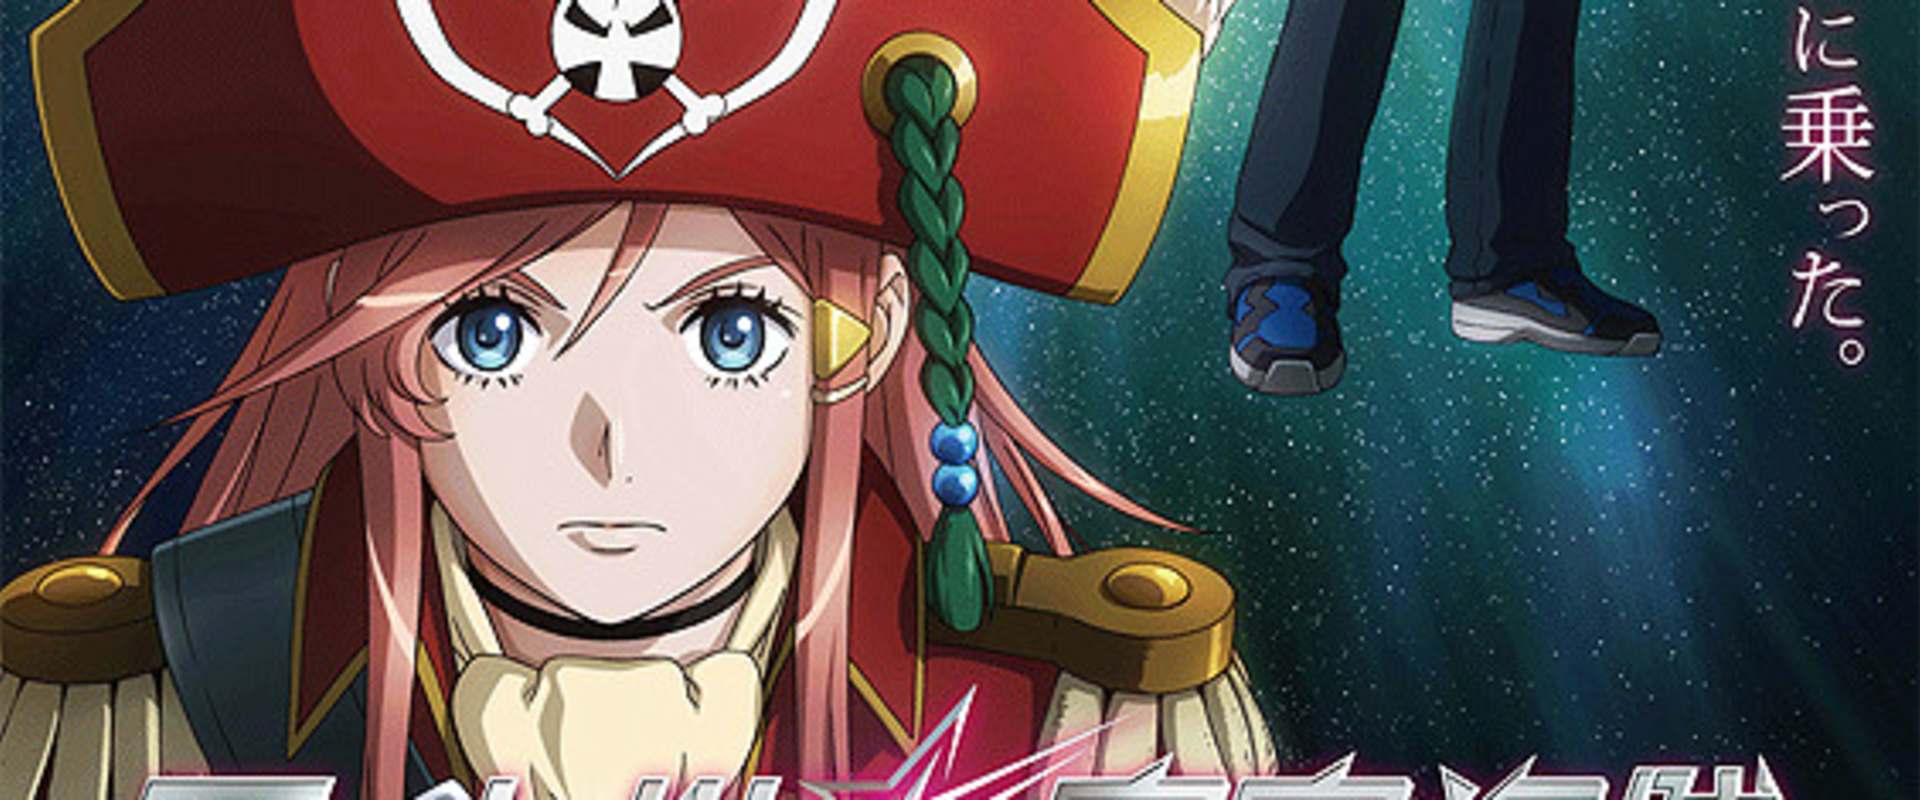 Bodacious Space Pirates background 1